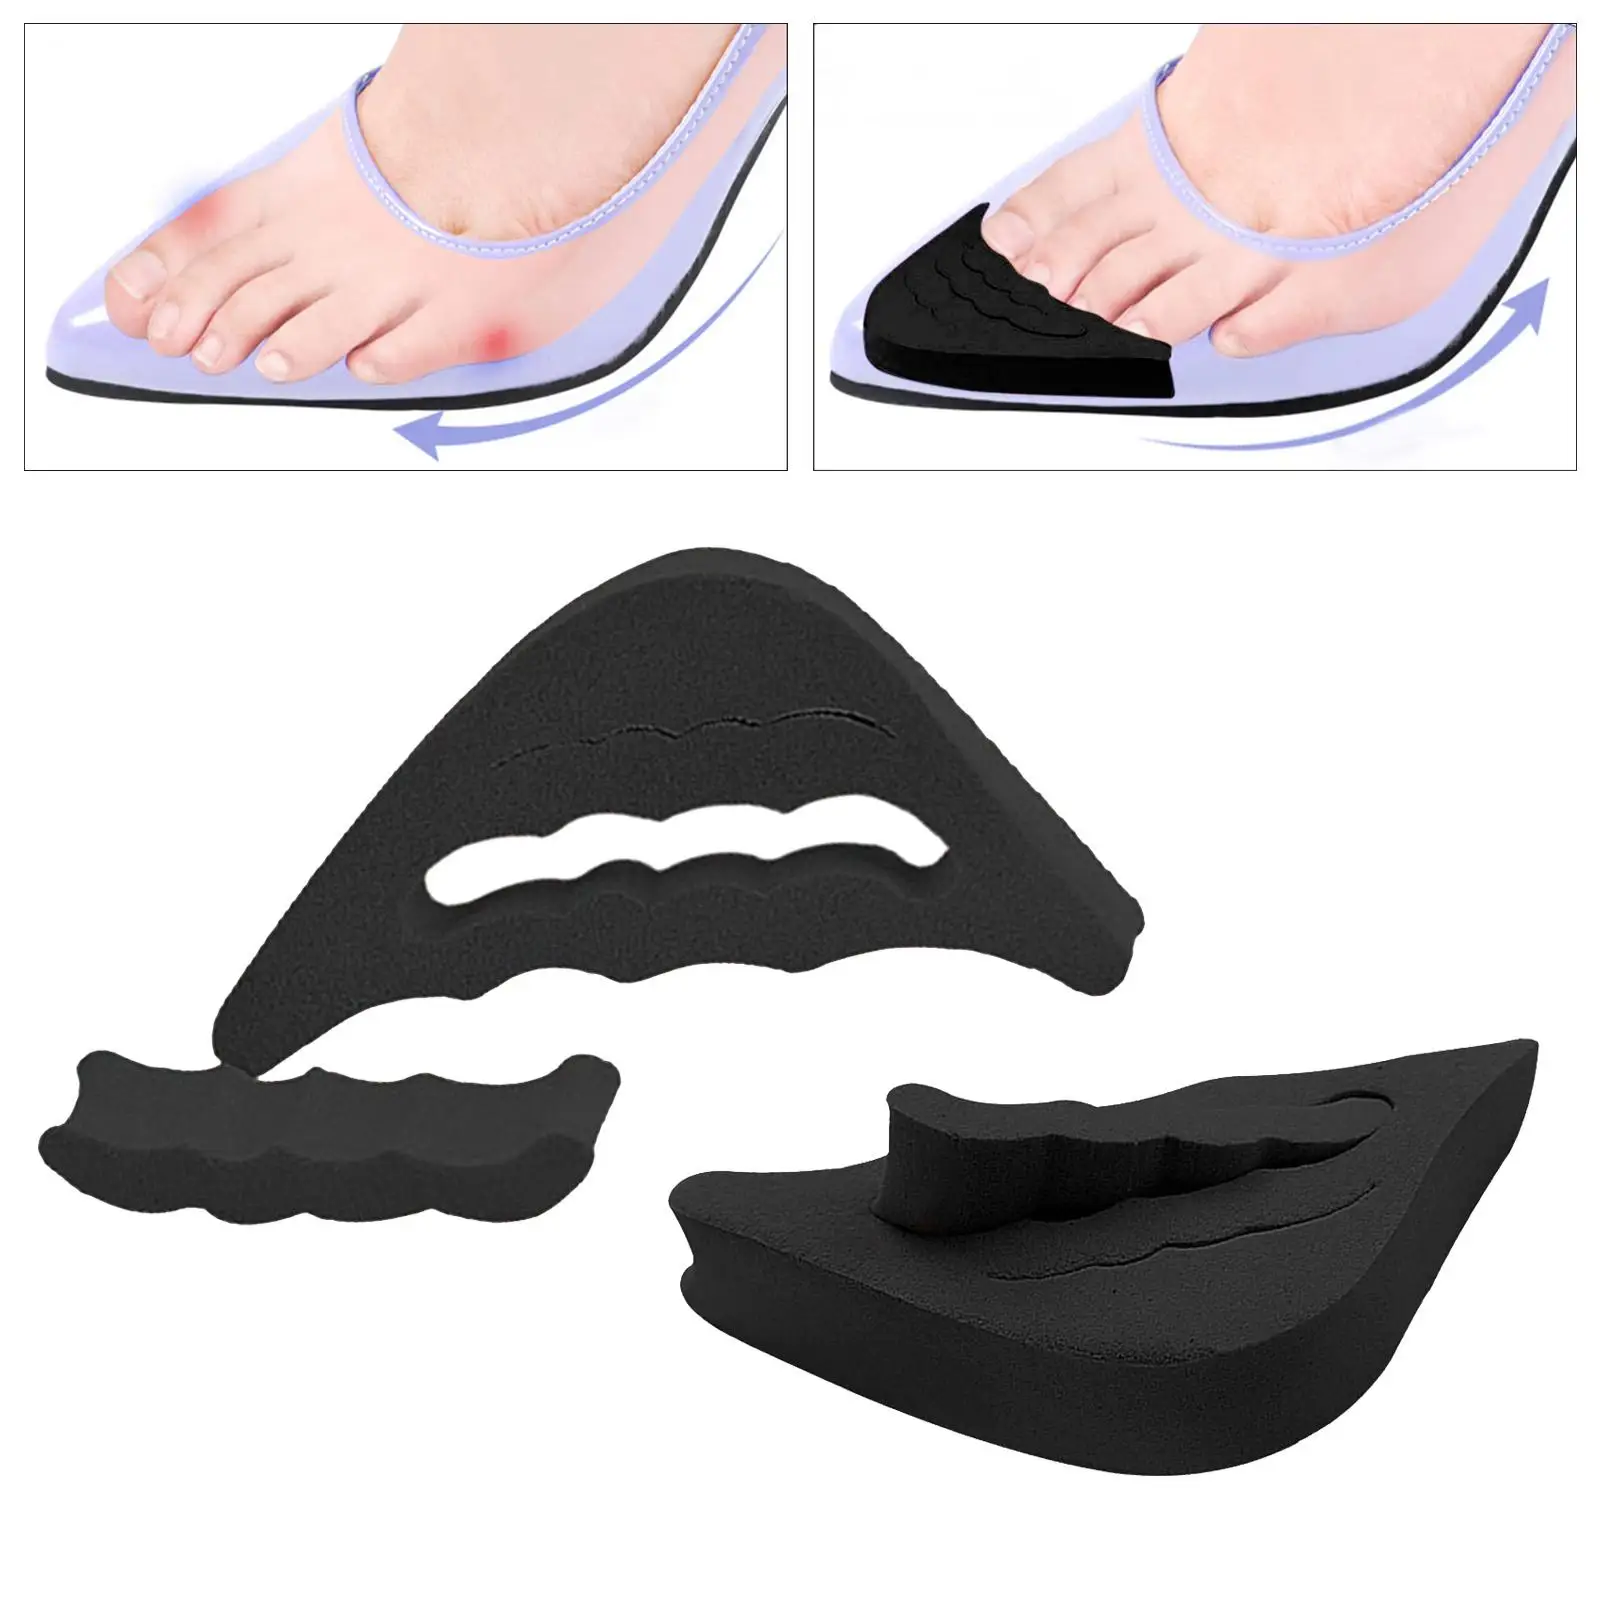 Toe Filler Inserts Pad Reusable Durable Adjustable Practical Breathable Reusable Insoles for Sports Camping Hiking Fishing Flats